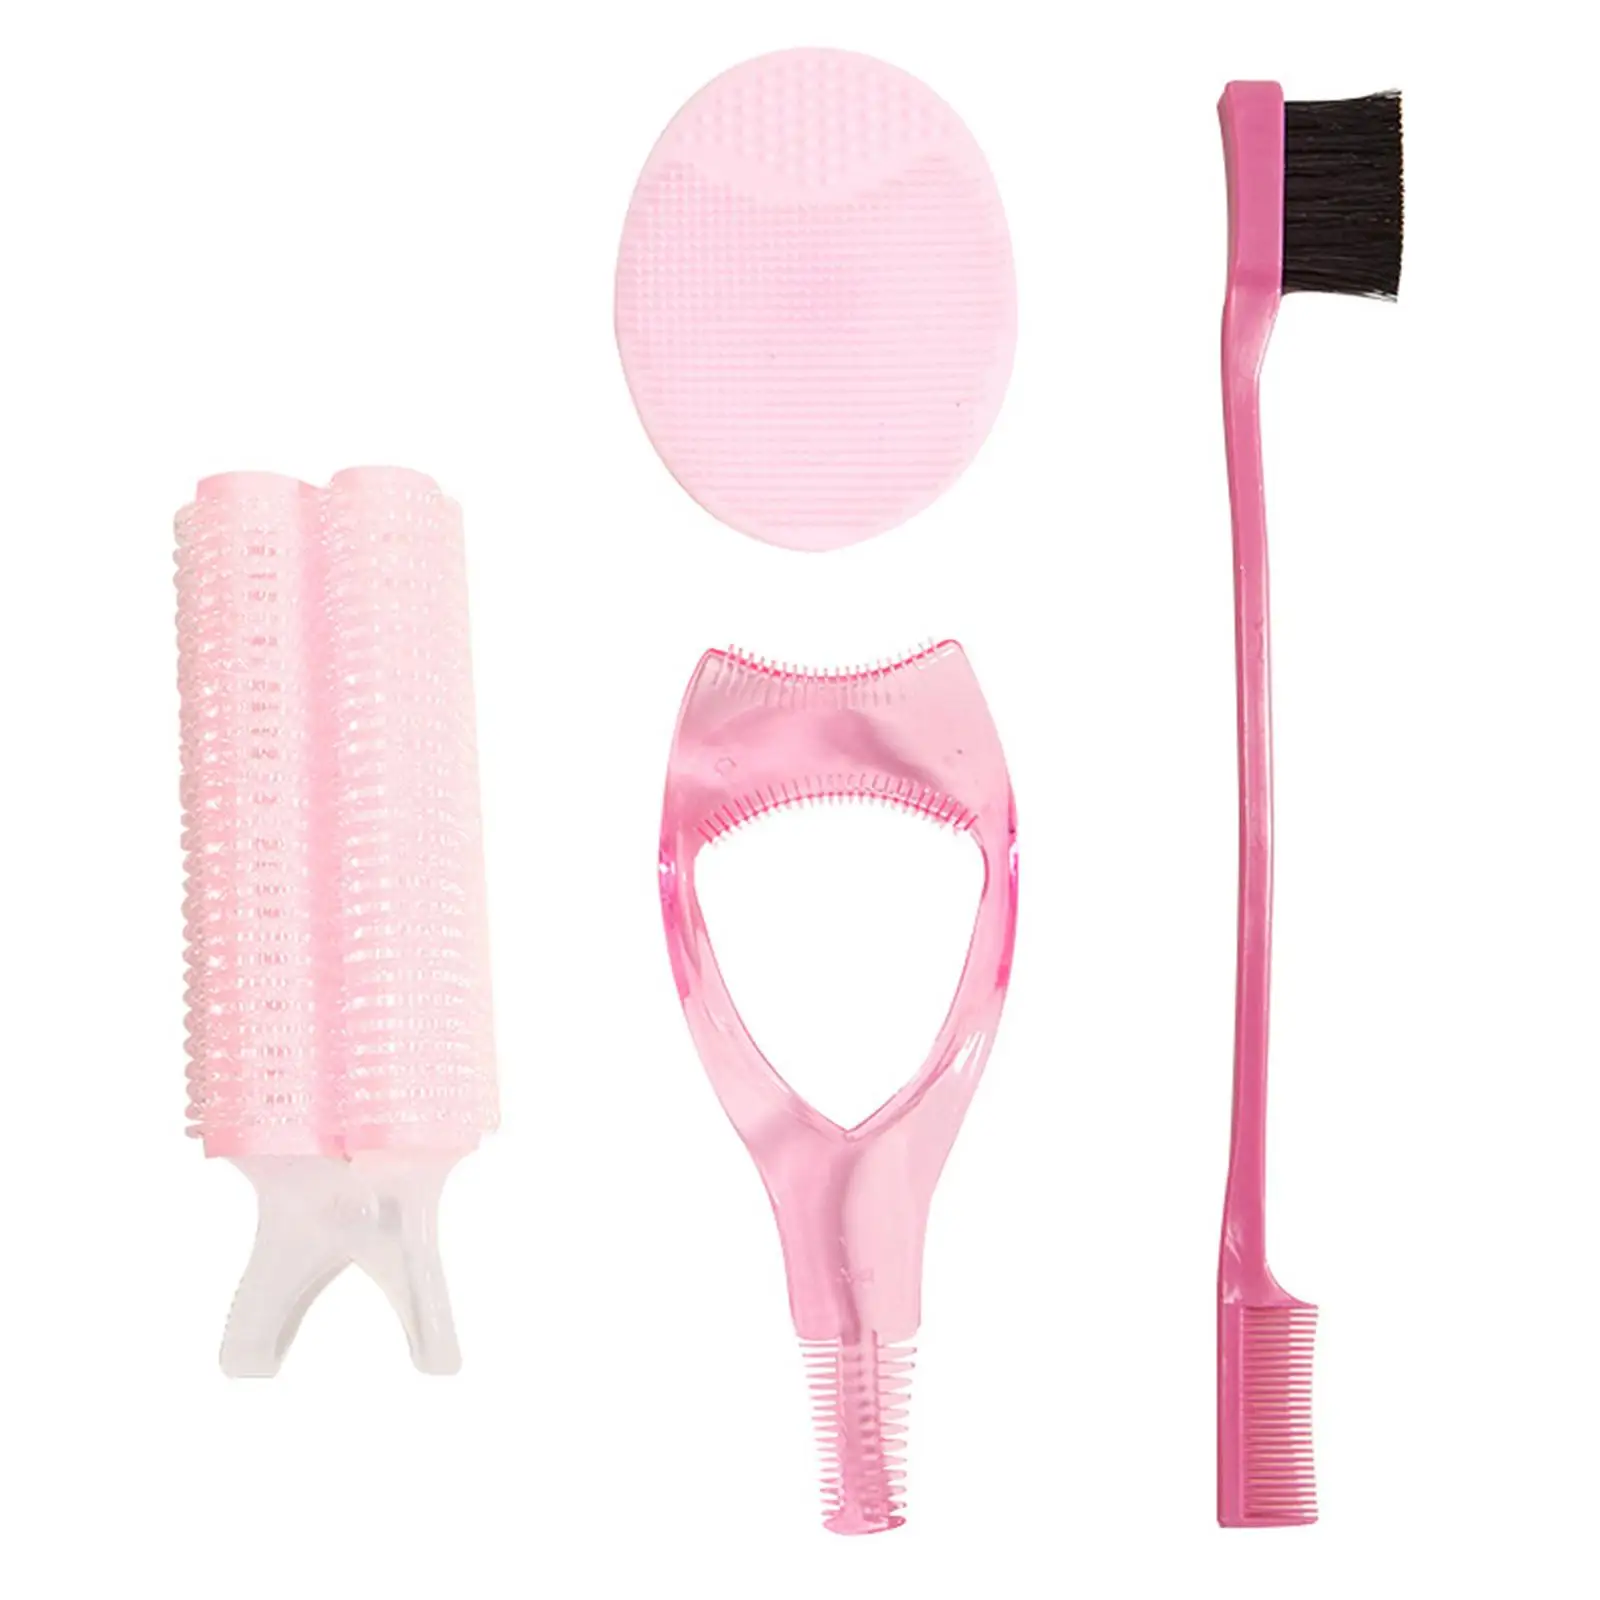 4 in 1 Makeup Set Hair Brush for Edge Facial Cleansing Massager Device Eyelash Brush Aid Lightweight Portable Compact for Travel